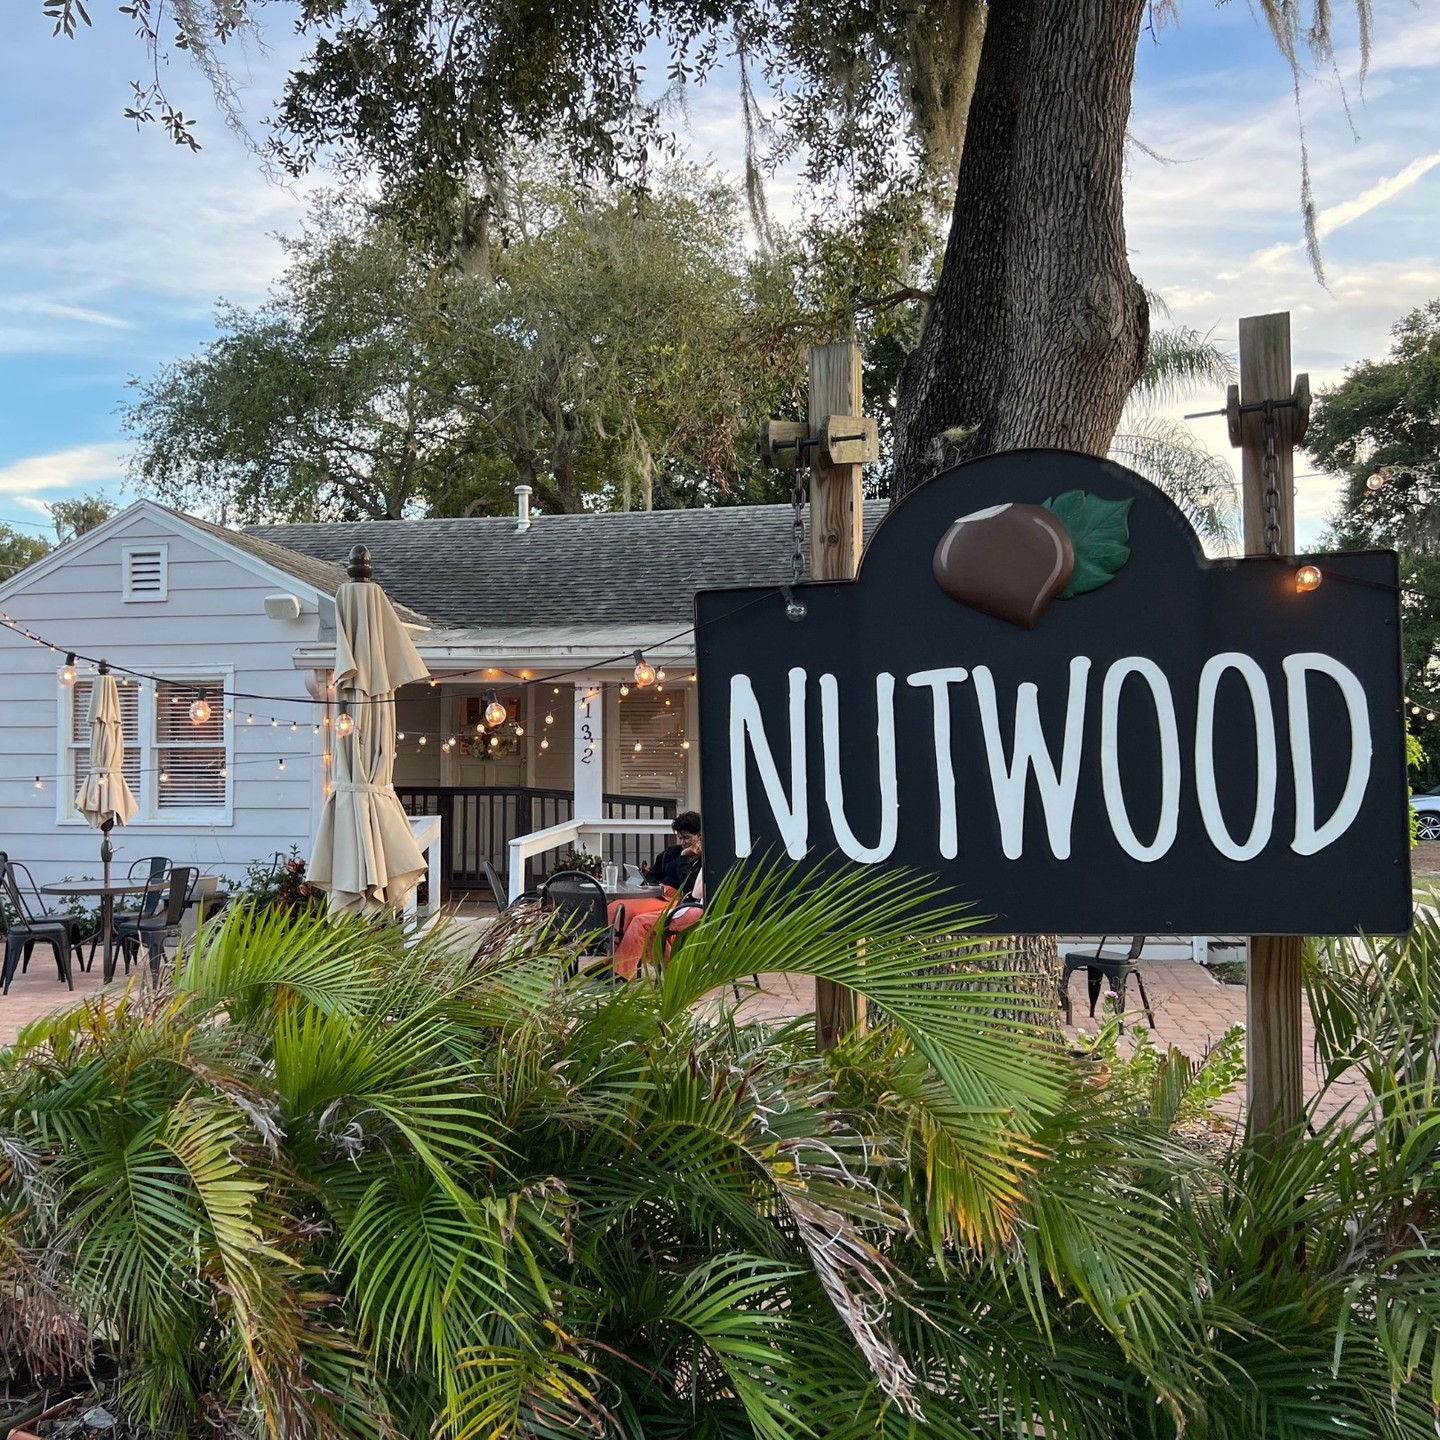 Nutwood's restaurant exterior and sign